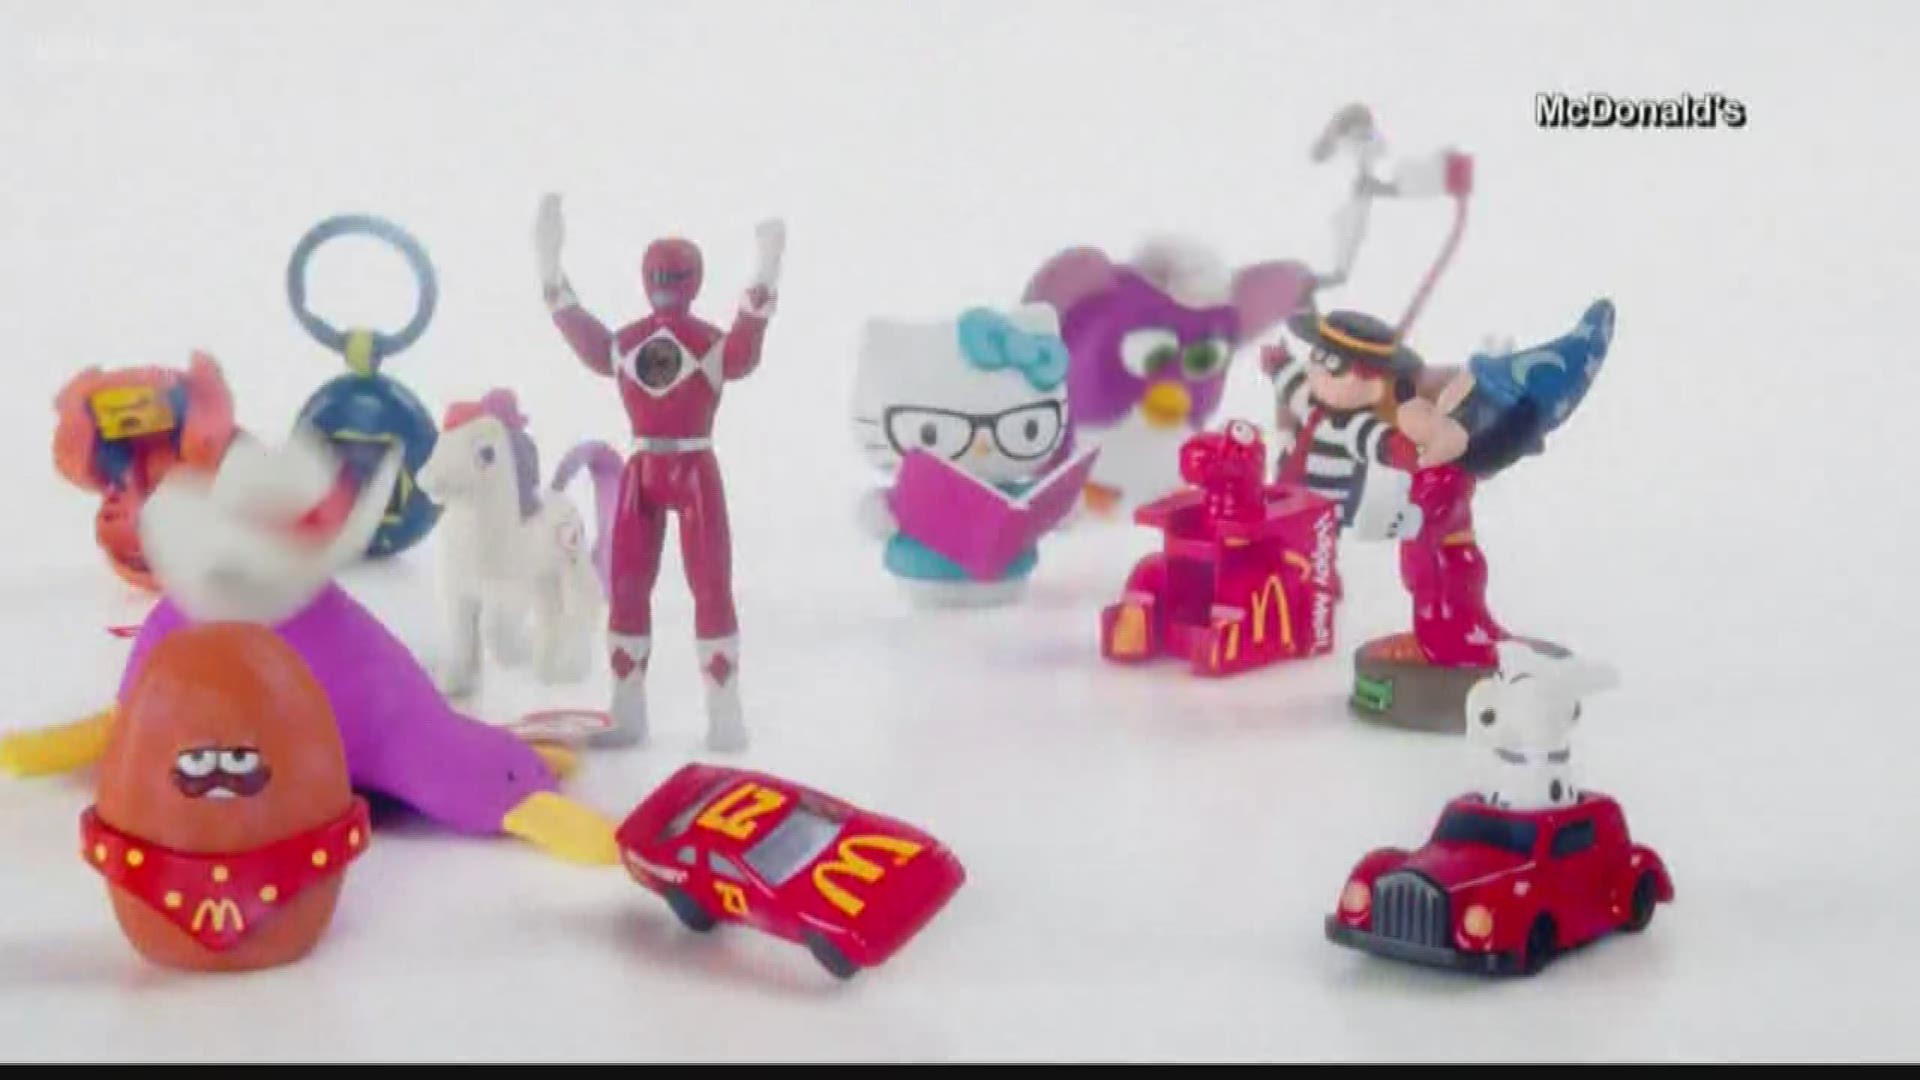 McDonald's bringing back some of its most popular Happy Meal toys